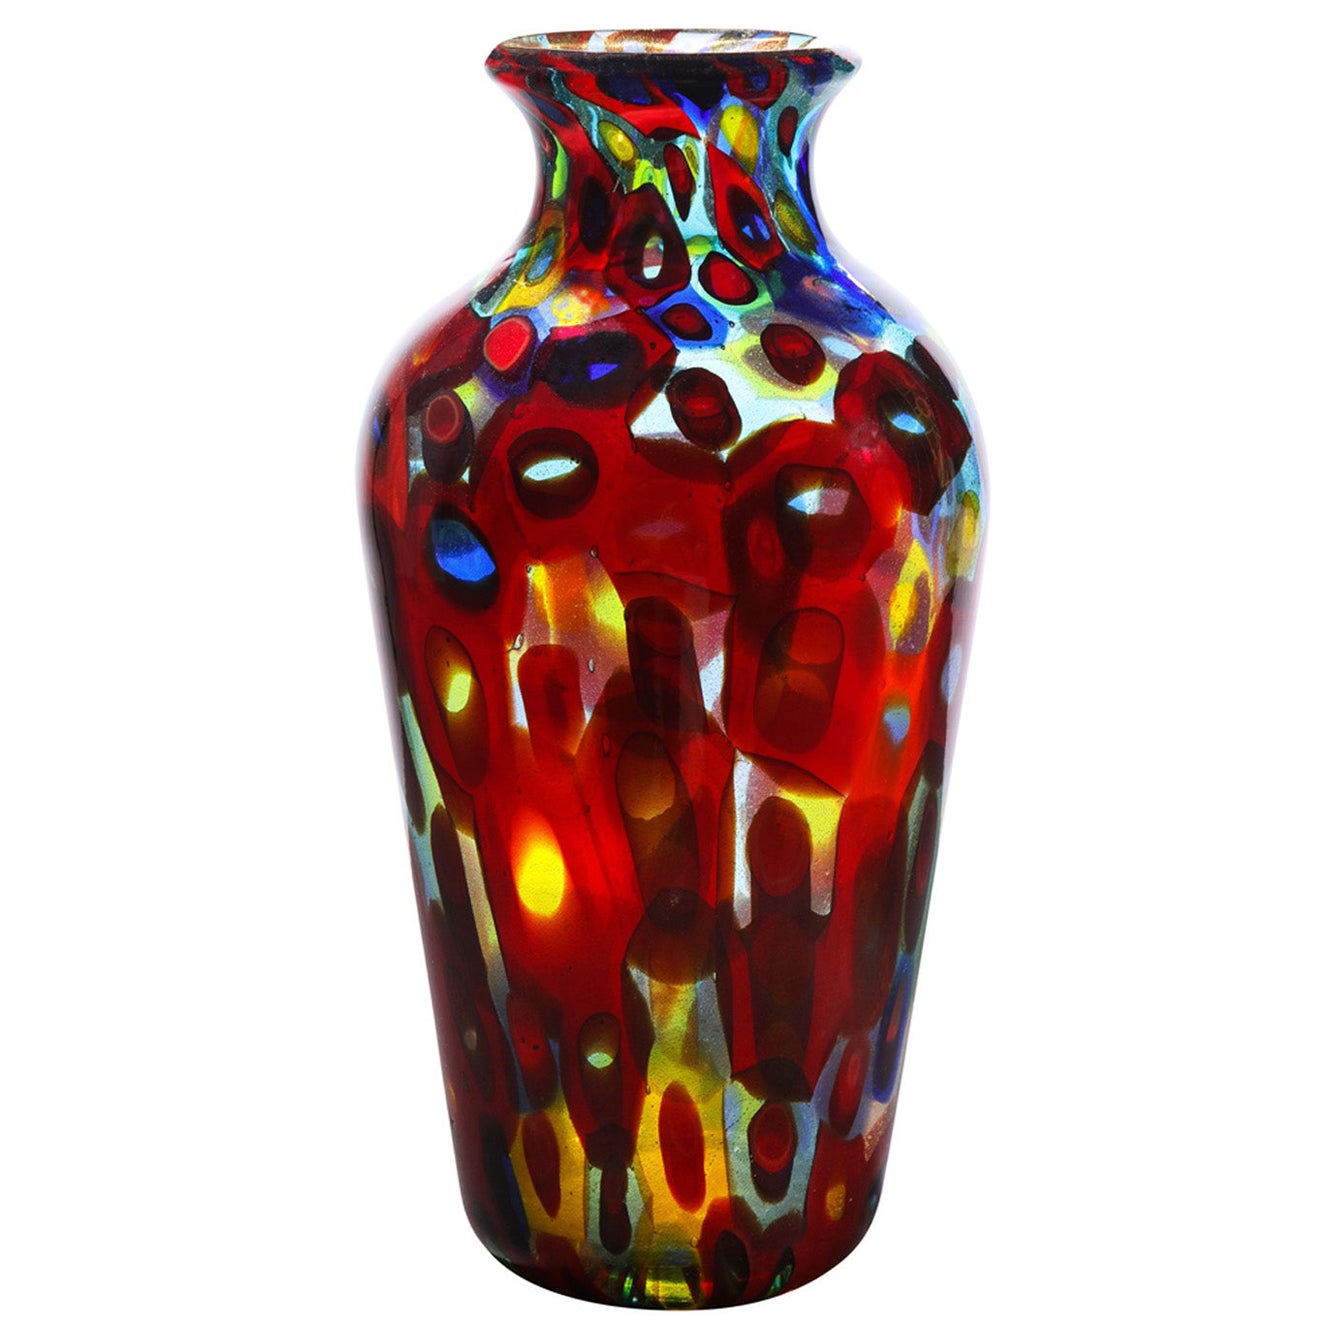 Handblown Glass Vase with Large Murrhines by Anzolo Fuga for A.V.E.M, 1950s